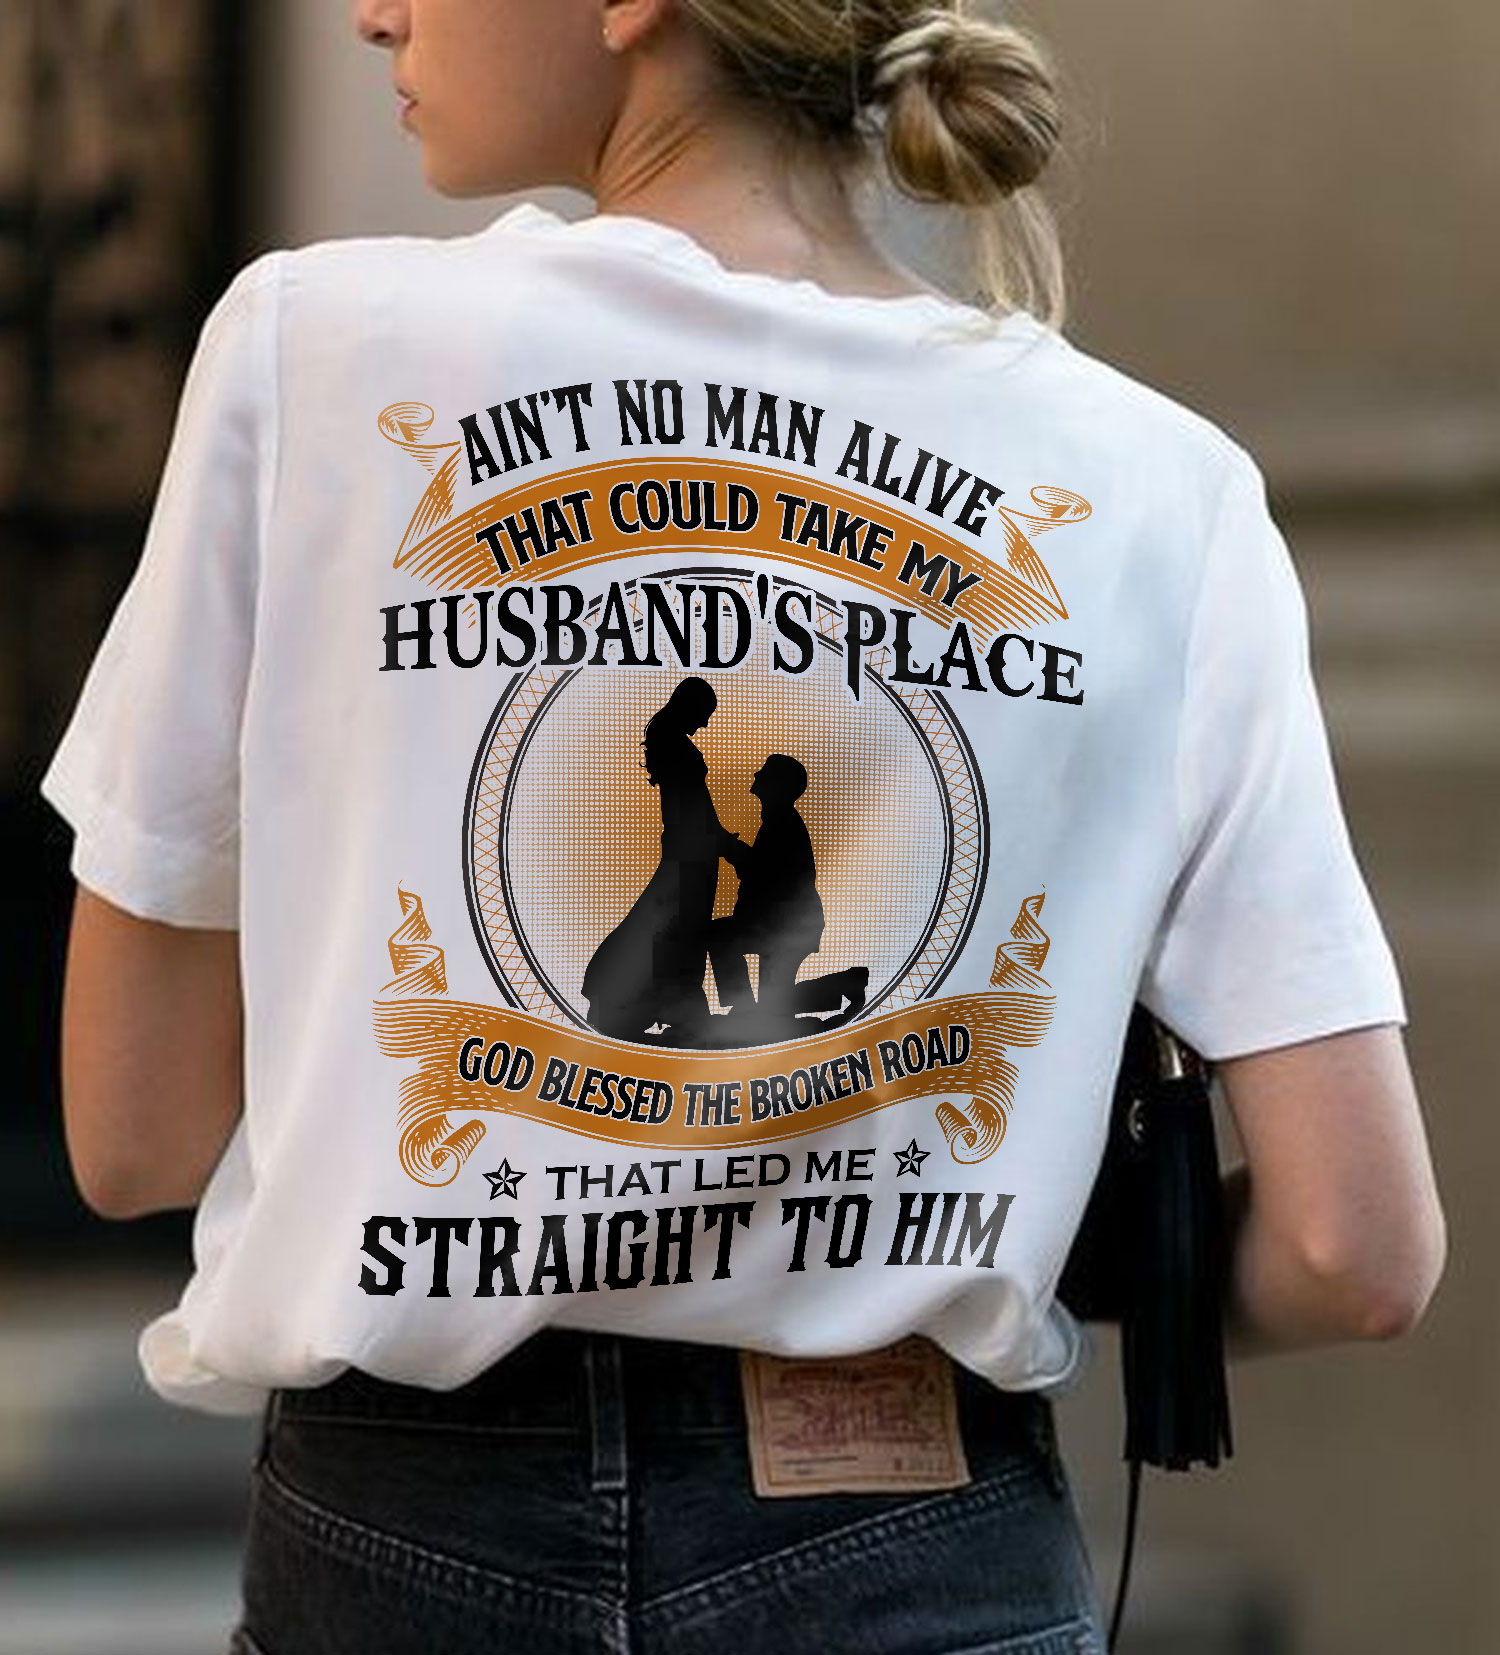 Ain't no man alive that could take my husband's place - Husband in heaven, wife and husband